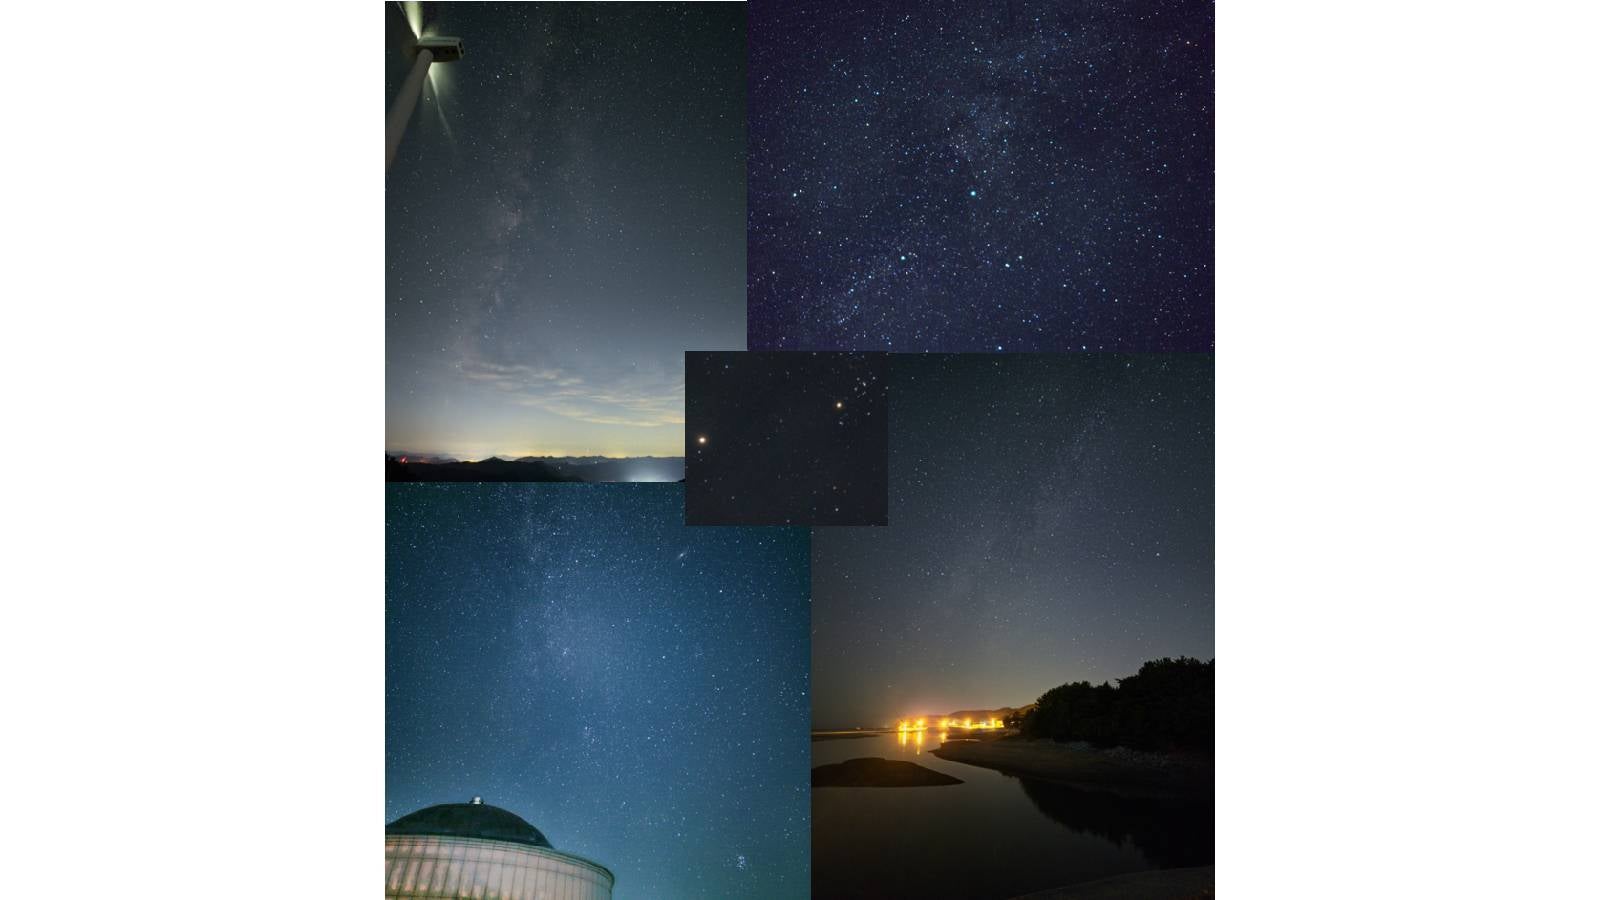 Galaxy S22 gets an astrophotography mode - Galaxy S22 series gains new astrophotography and multiple exposure camera features